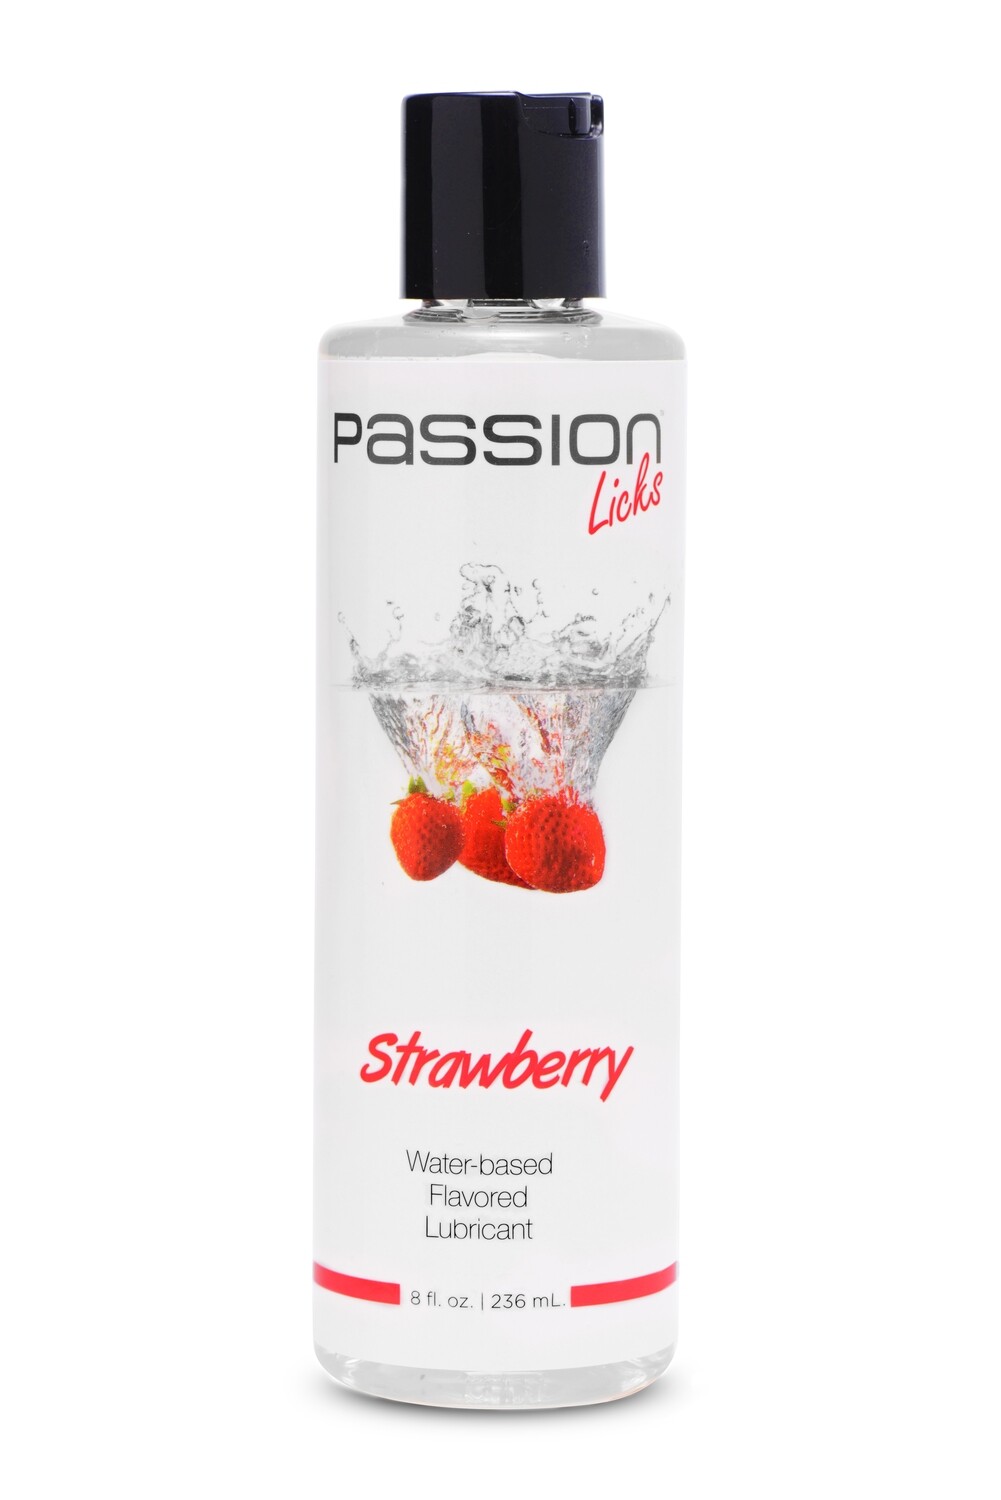 Passion Licks Strawberry Water Based Flavored  Lubricant - 8 Fl Oz /